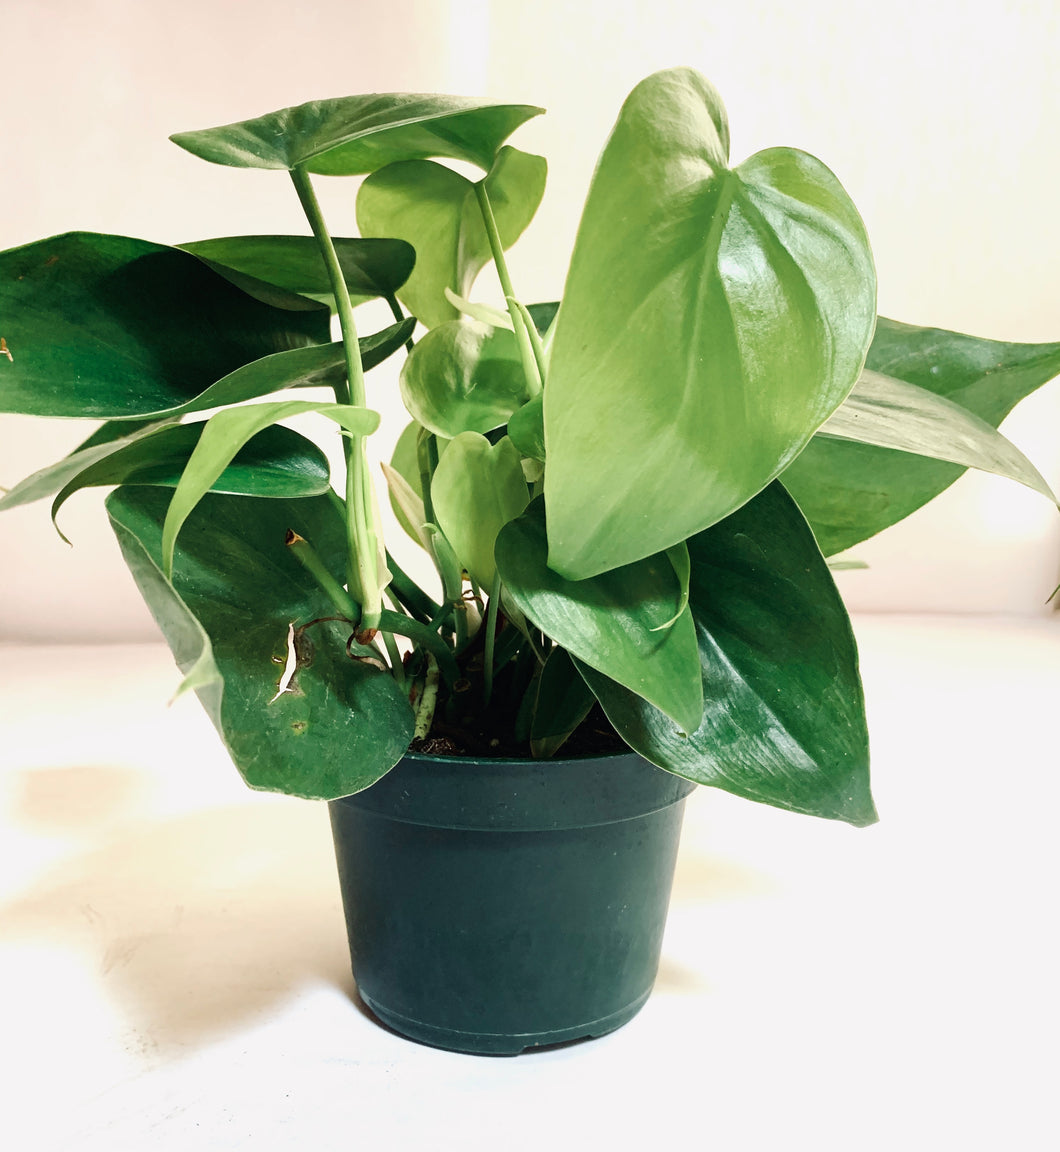 A tropical houseplant with medium-sized heart-shaped leaves. The leaves are medium green with light veining.